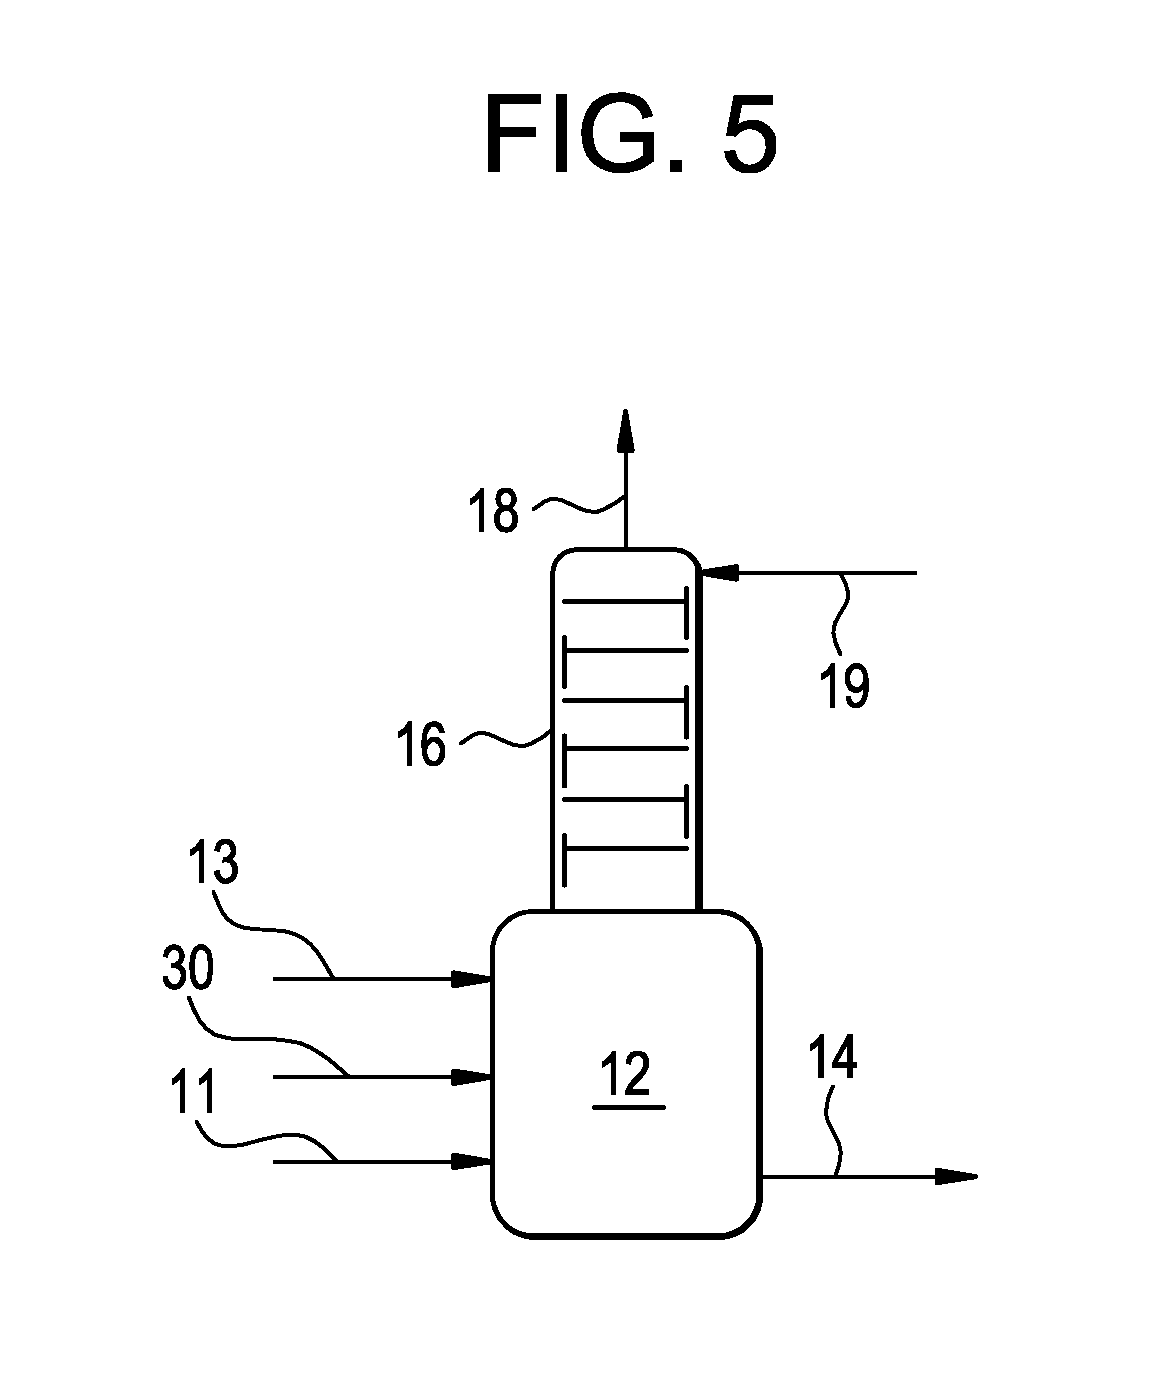 Process and apparatus for vapor phase purification during hydrochlorination of multi-hydroxylated aliphatic hydrocarbon compounds